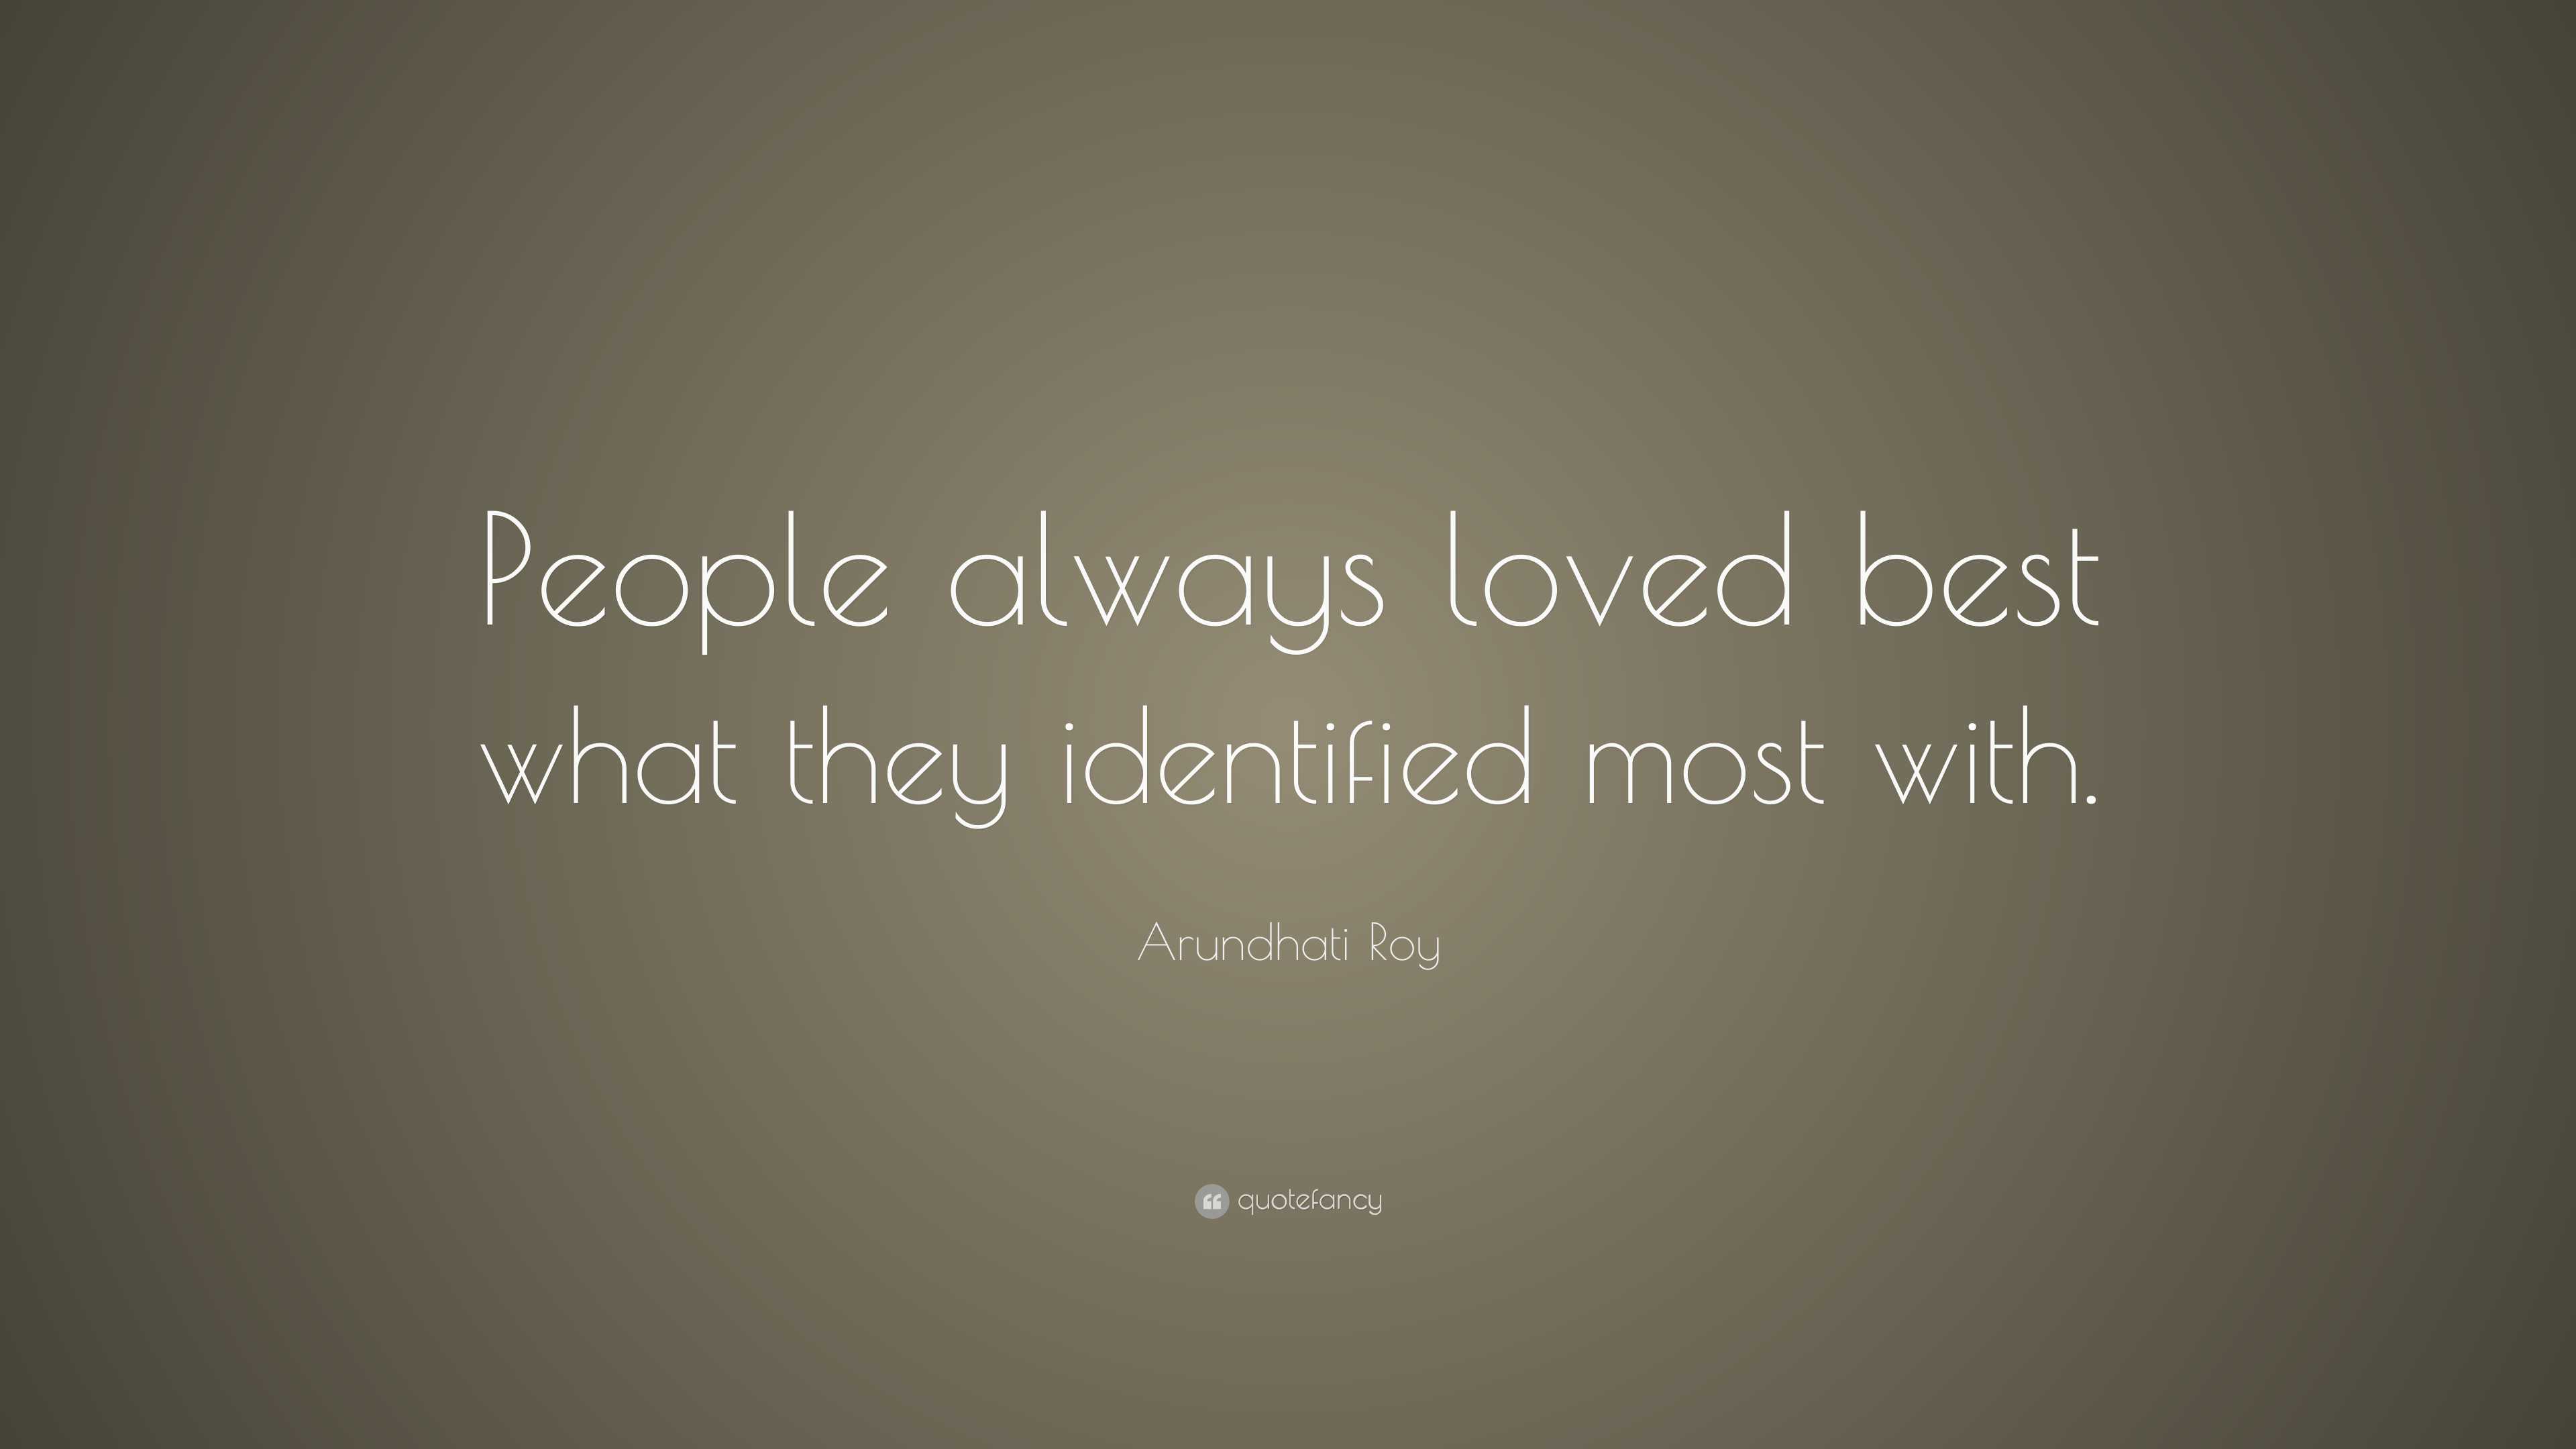 Arundhati Roy Quote: “People always loved best what they identified most  with.”